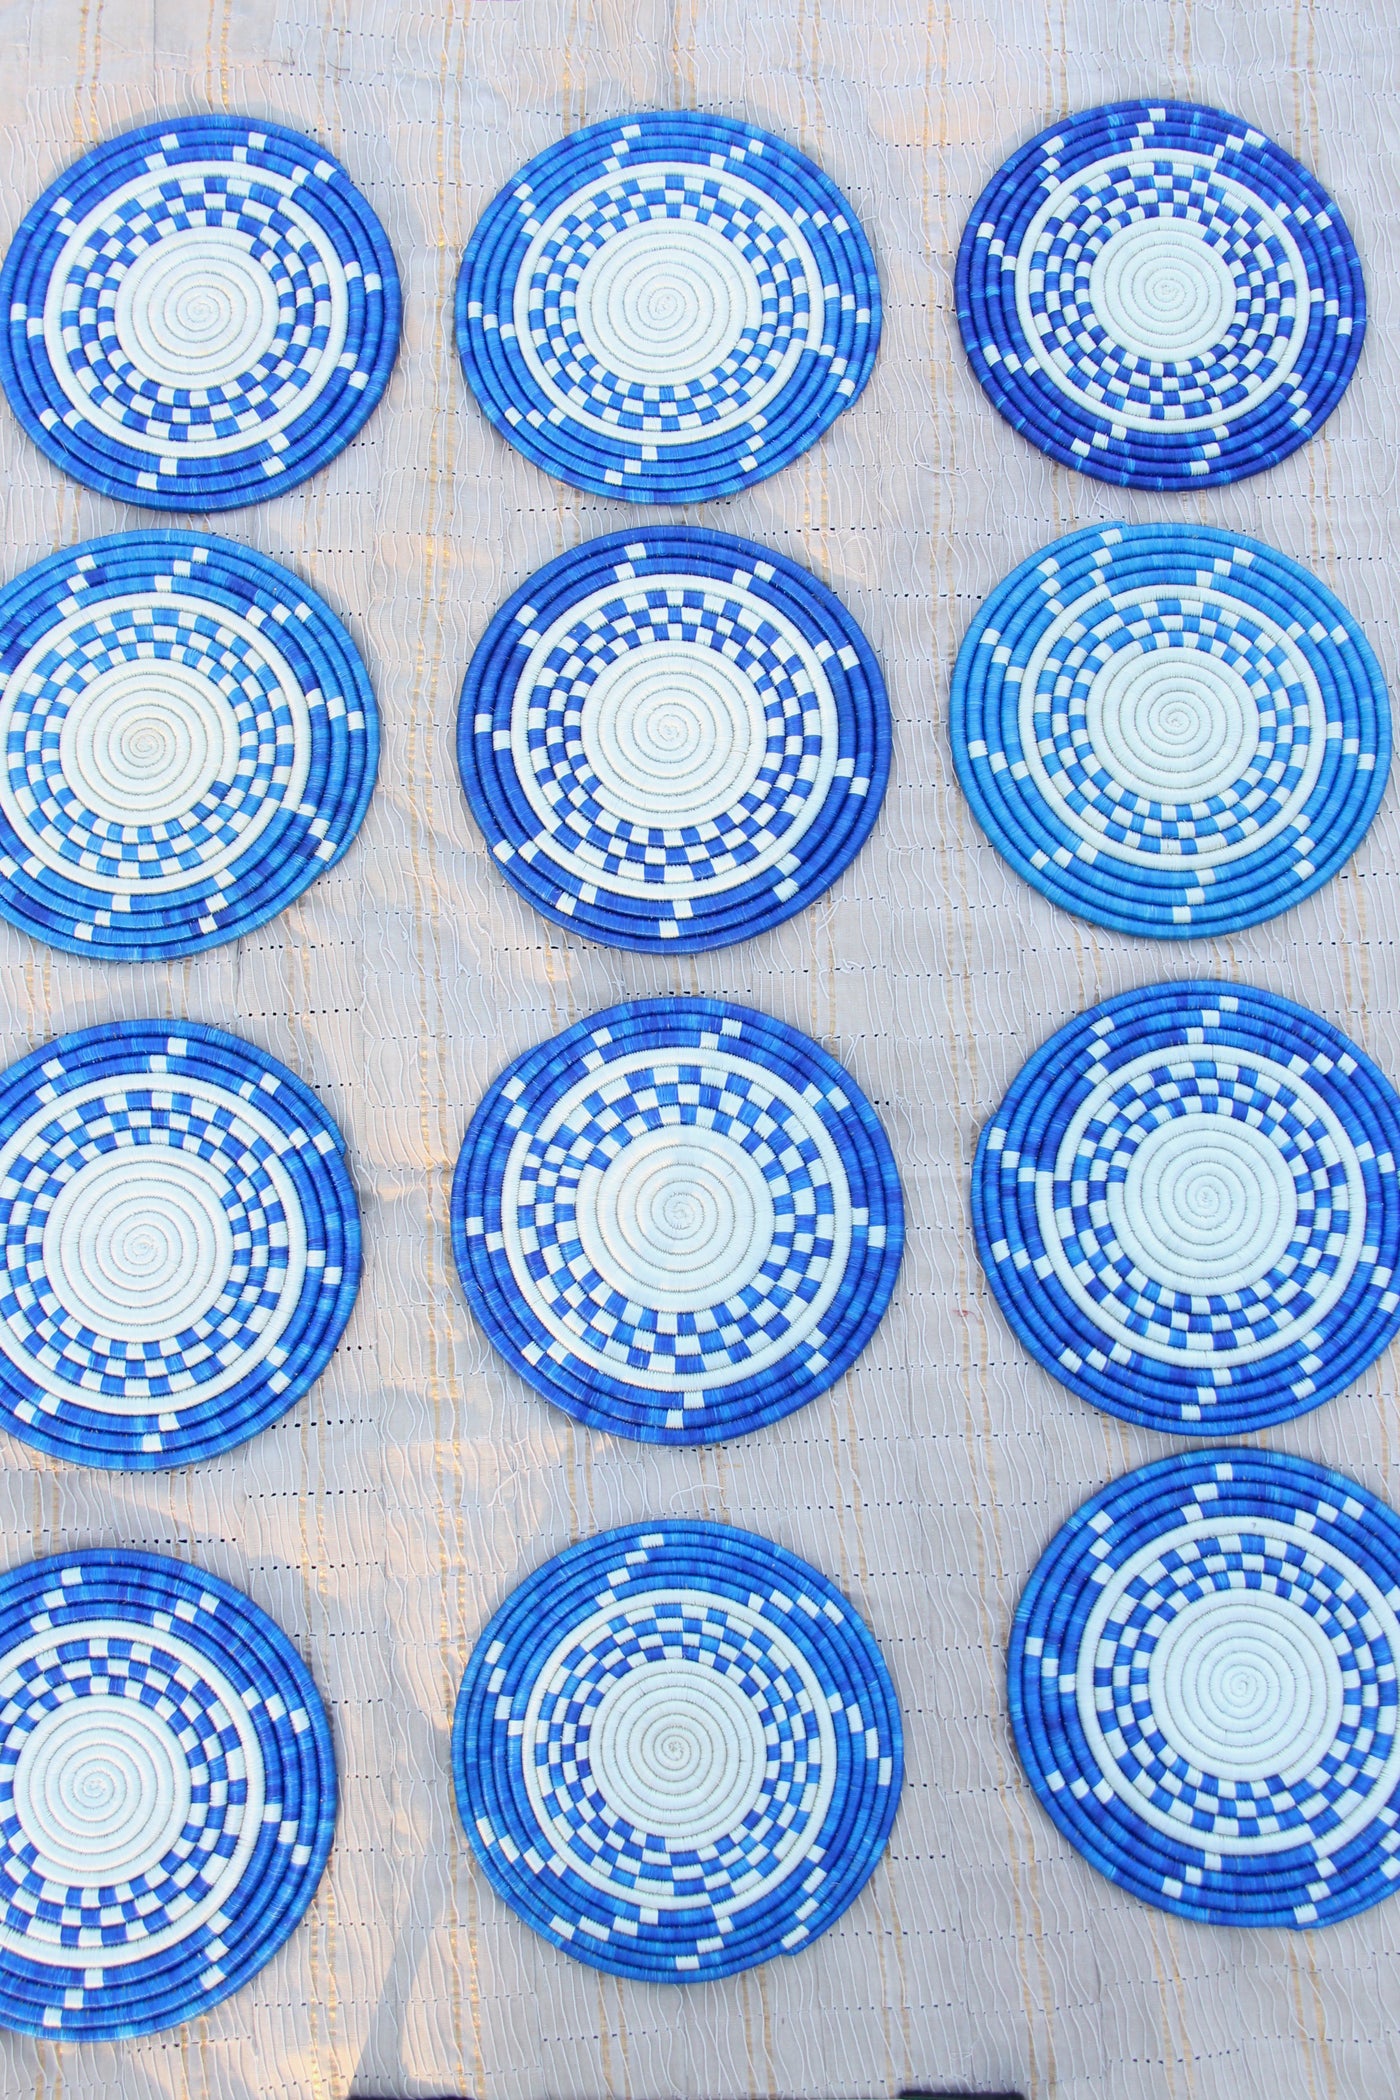 Classic Blue & White African Trivet, Boho Home Decor, Wall Hanging